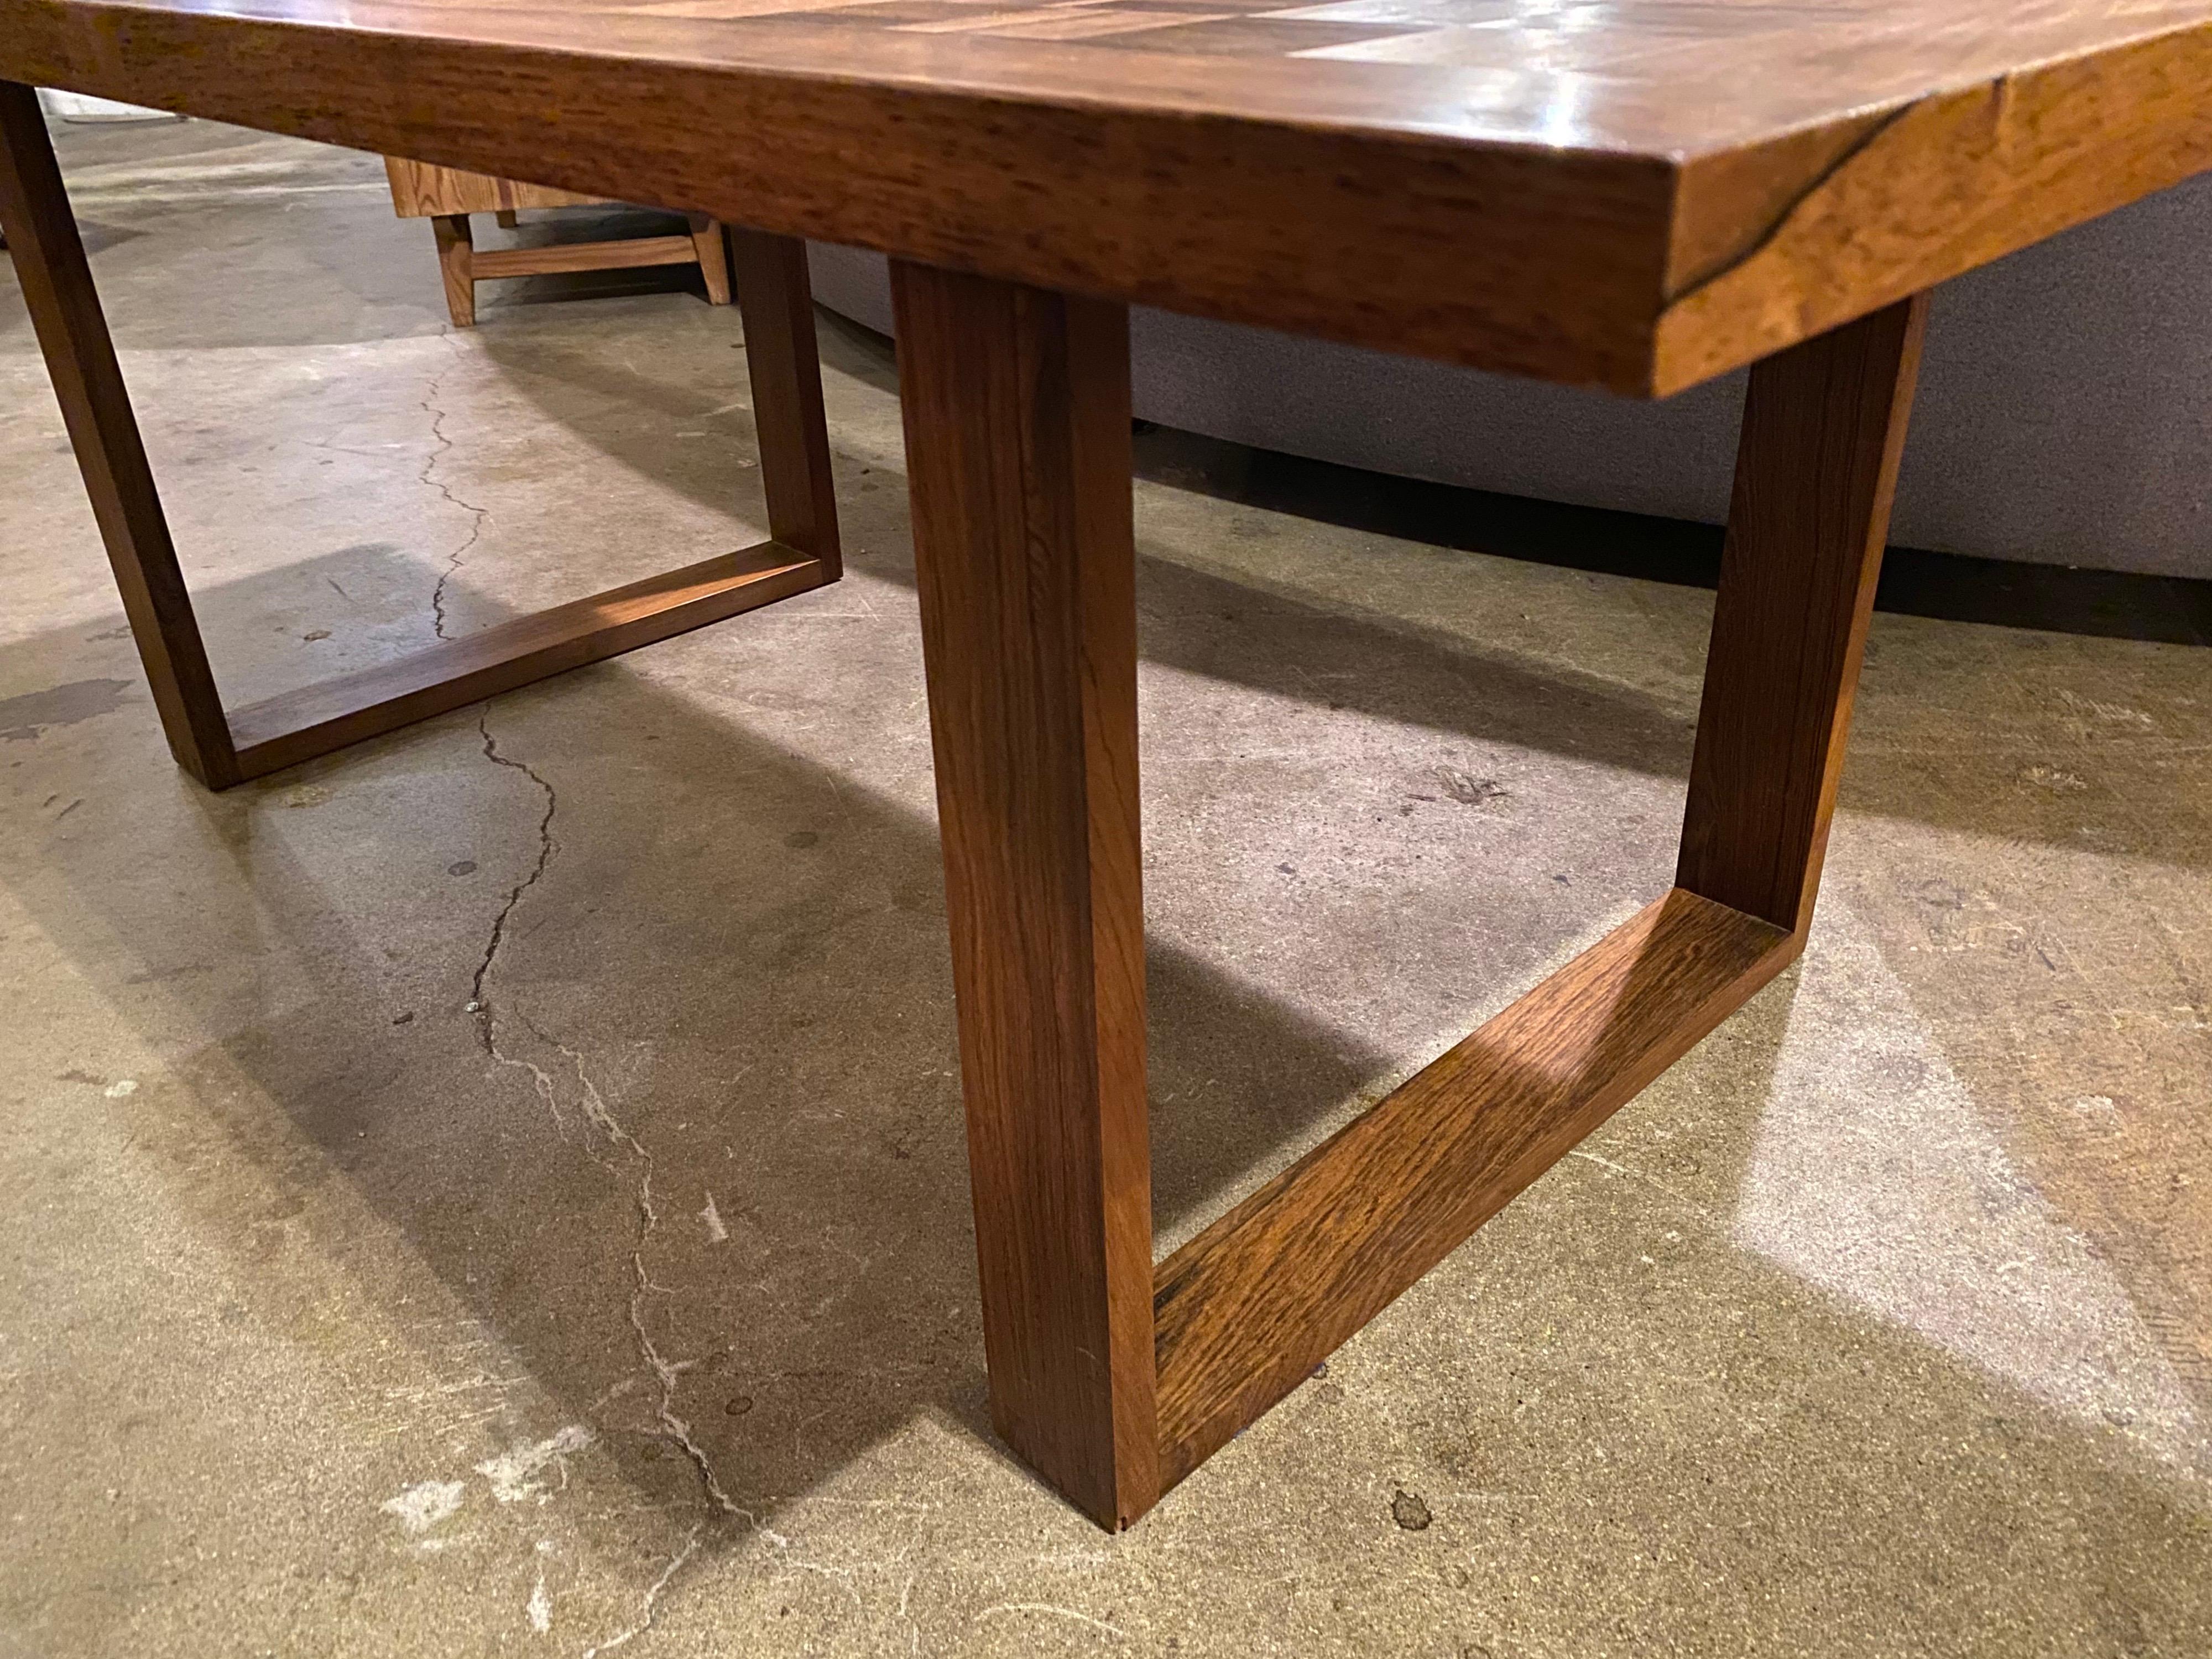 Scandanavian modern rosewood coffee table by Poul Cadovius features a parquet or chess pattern. This mid-century modern coffee table is in good vintage condition.